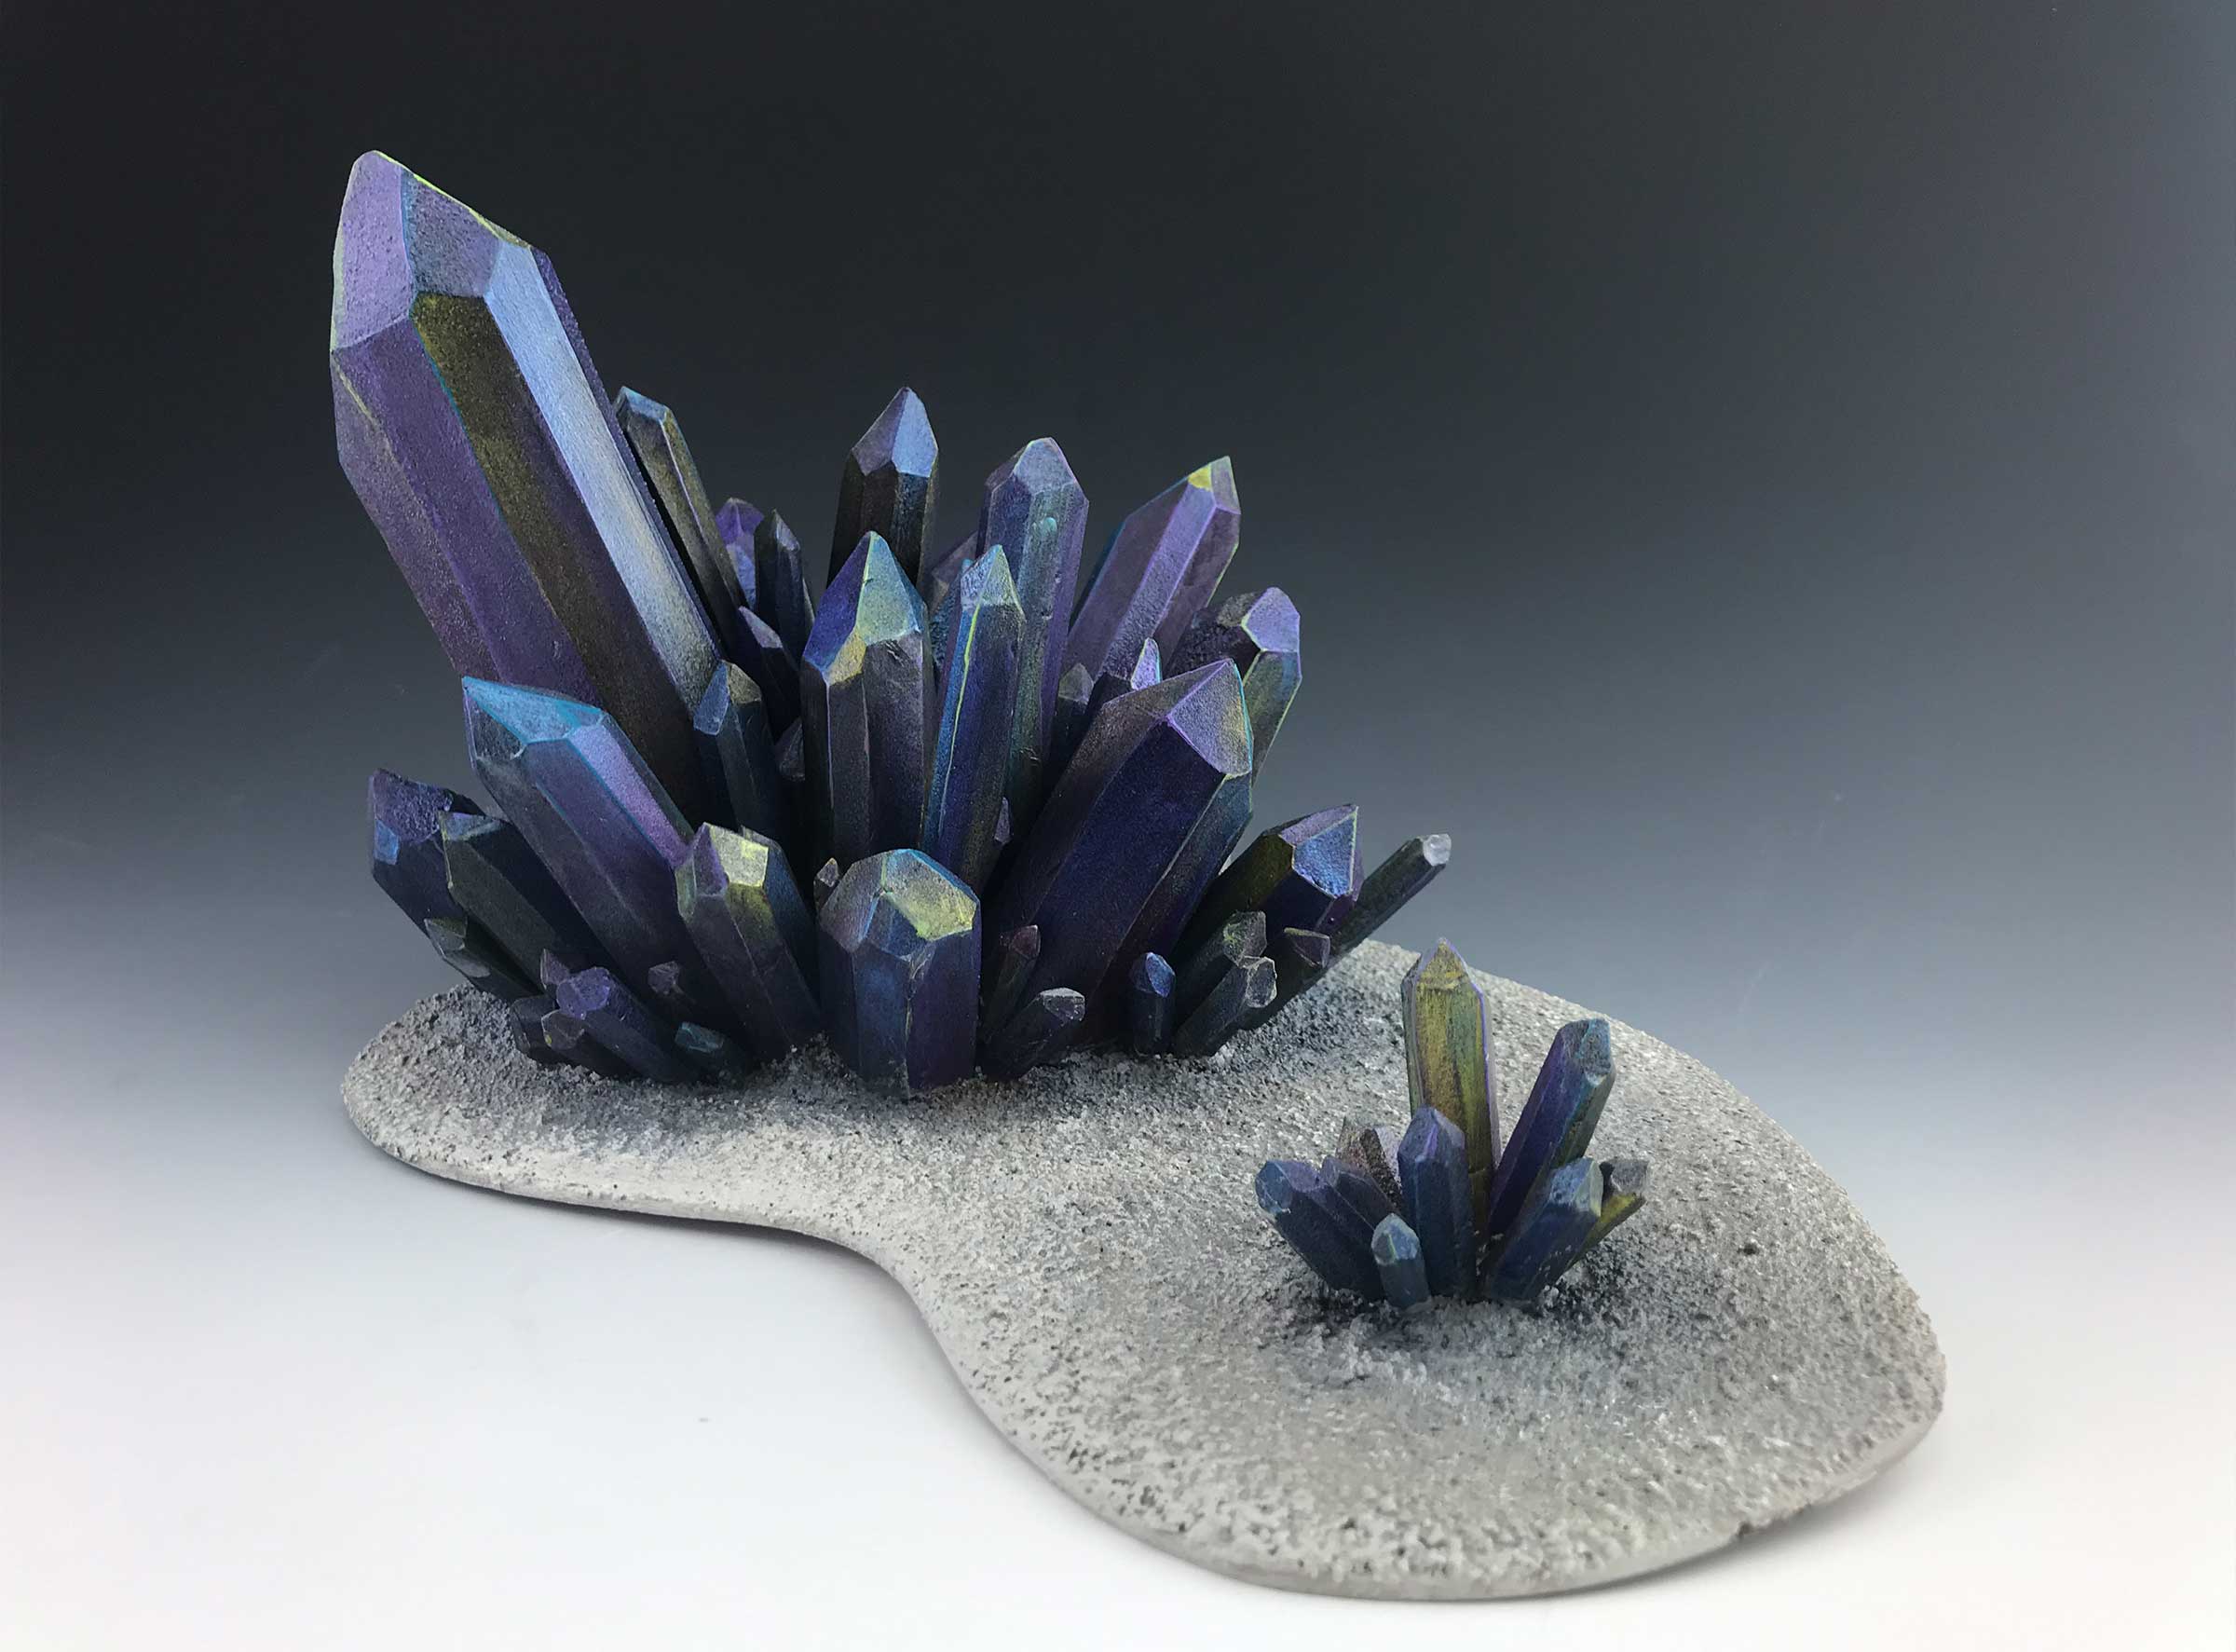 A model of a formation of blue crystals.